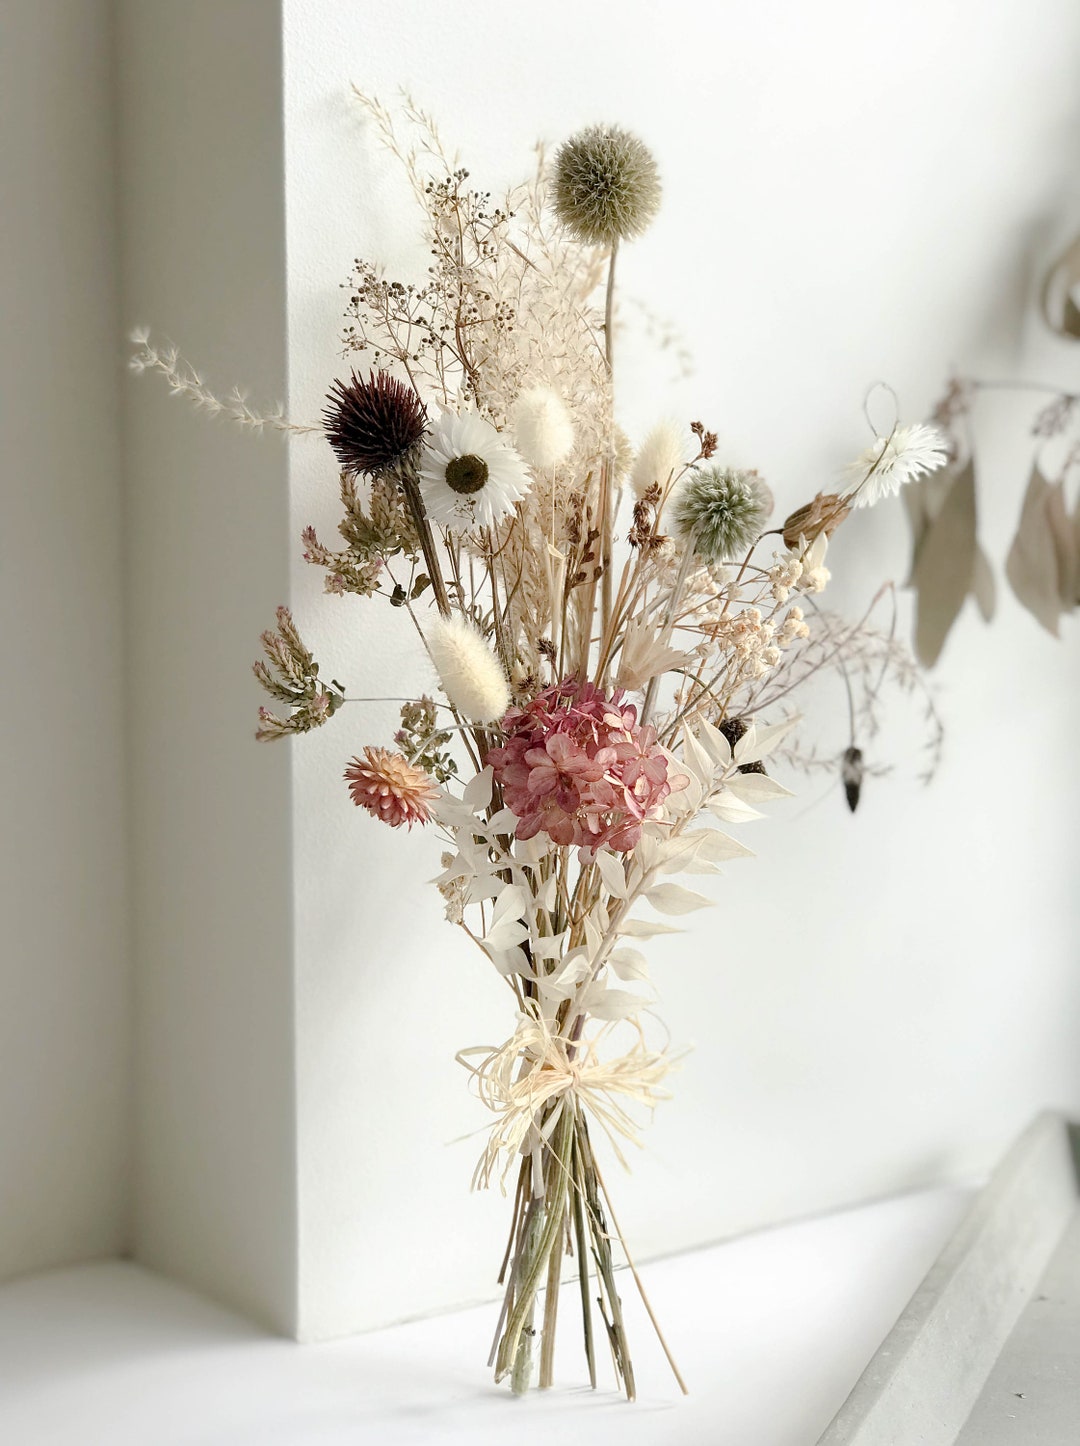 New Small Natural Dried Flowers Bouquet Dried Flower Confetti Bulk Natural  Dried Bouquets Fresh Dried Preserved Flowers Press Home Wedding Decor From  Doorkitch, $3.56